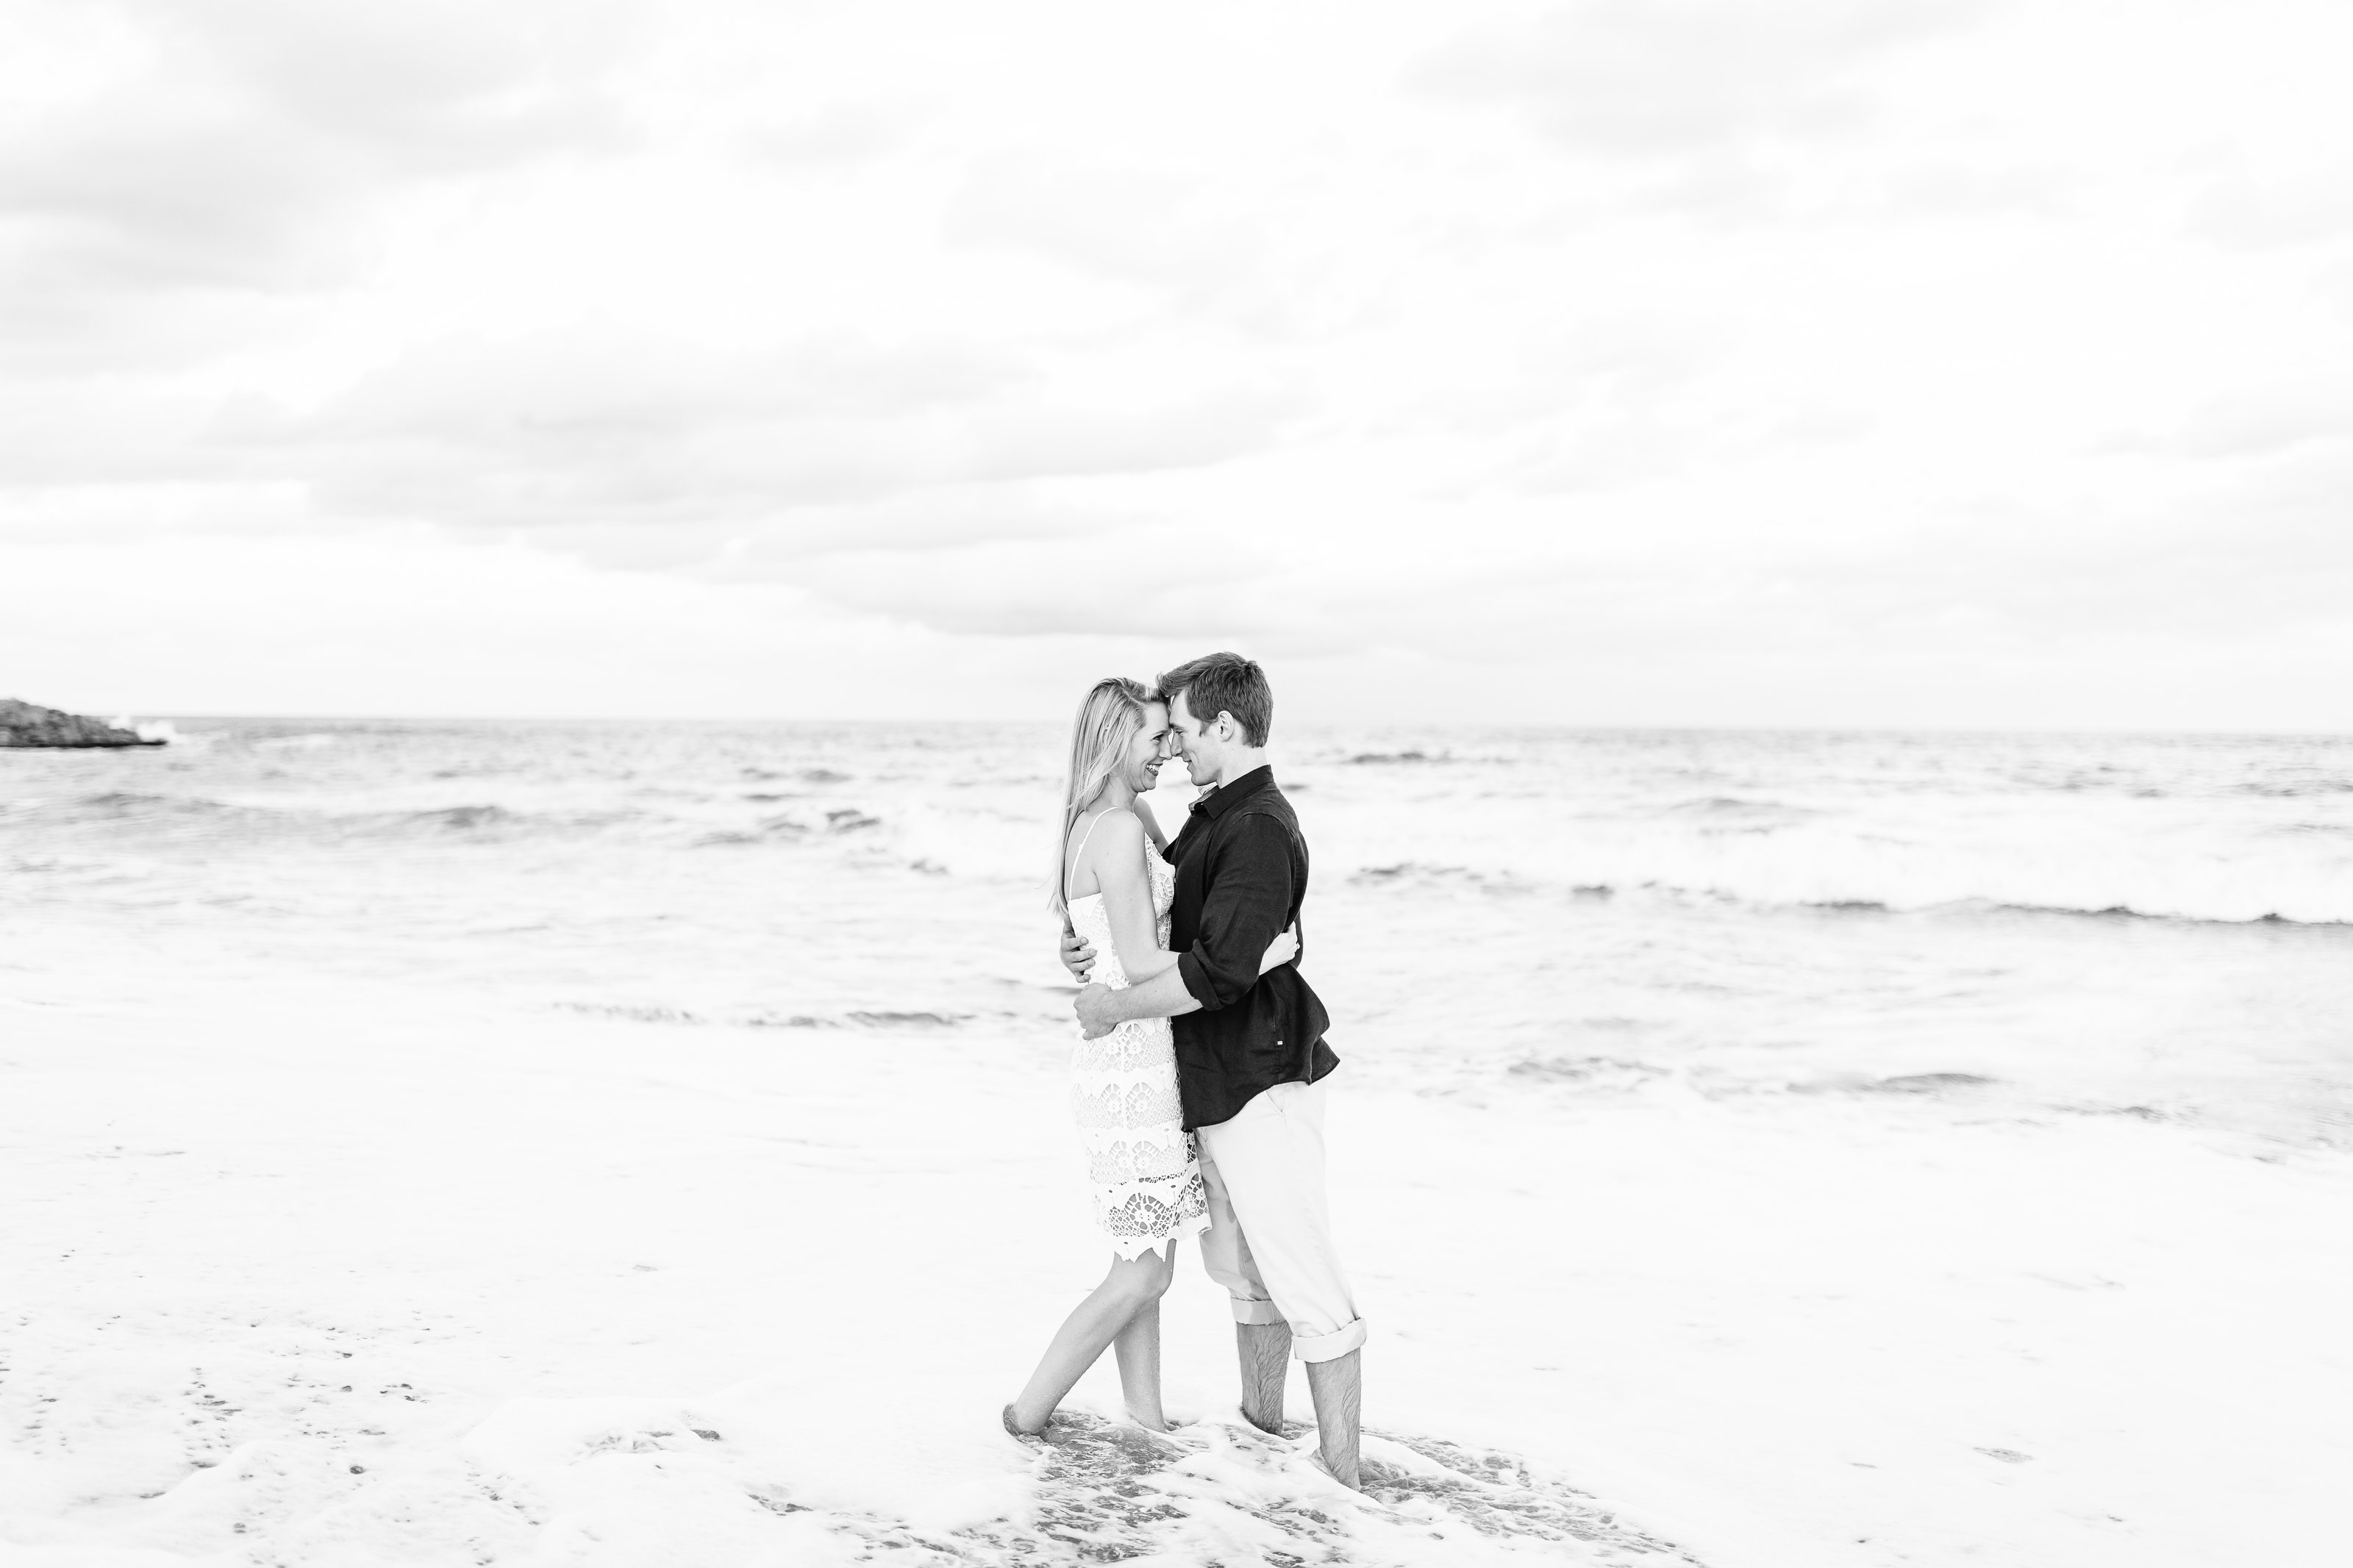 Wrightsville beach allows for breathtaking engagement photos